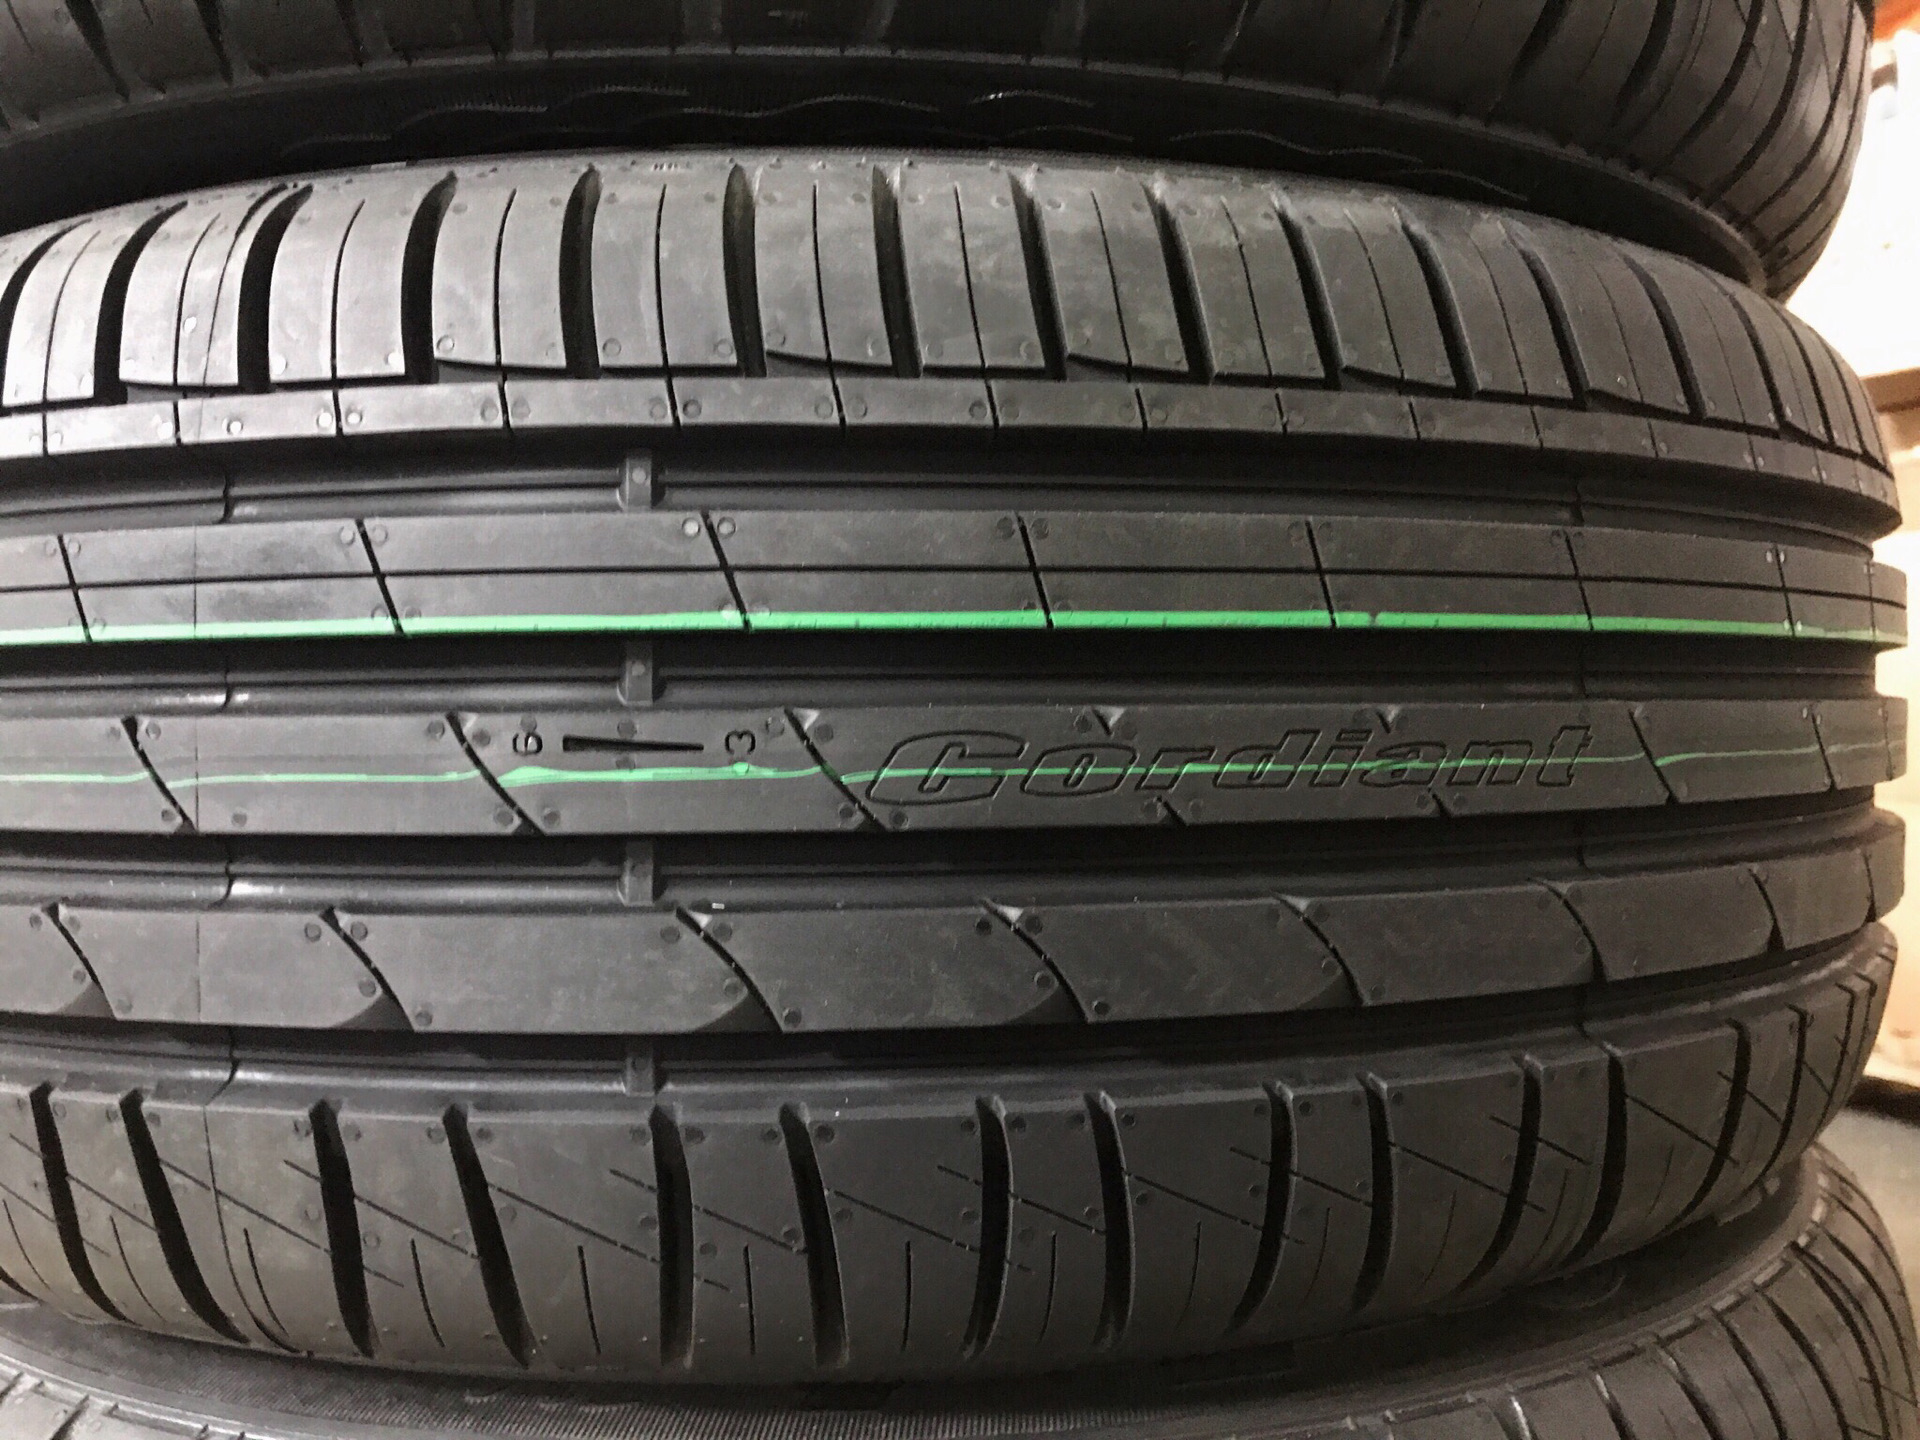 Шина cordiant sport 3 ps2. Cordiant Sport 3 215/55 r17. Cordiant Sport 3 ps2. Cordiant 205/65r16 Sport 3. 205/65r 16 Cordiant Sport 3 PS-2 95v.